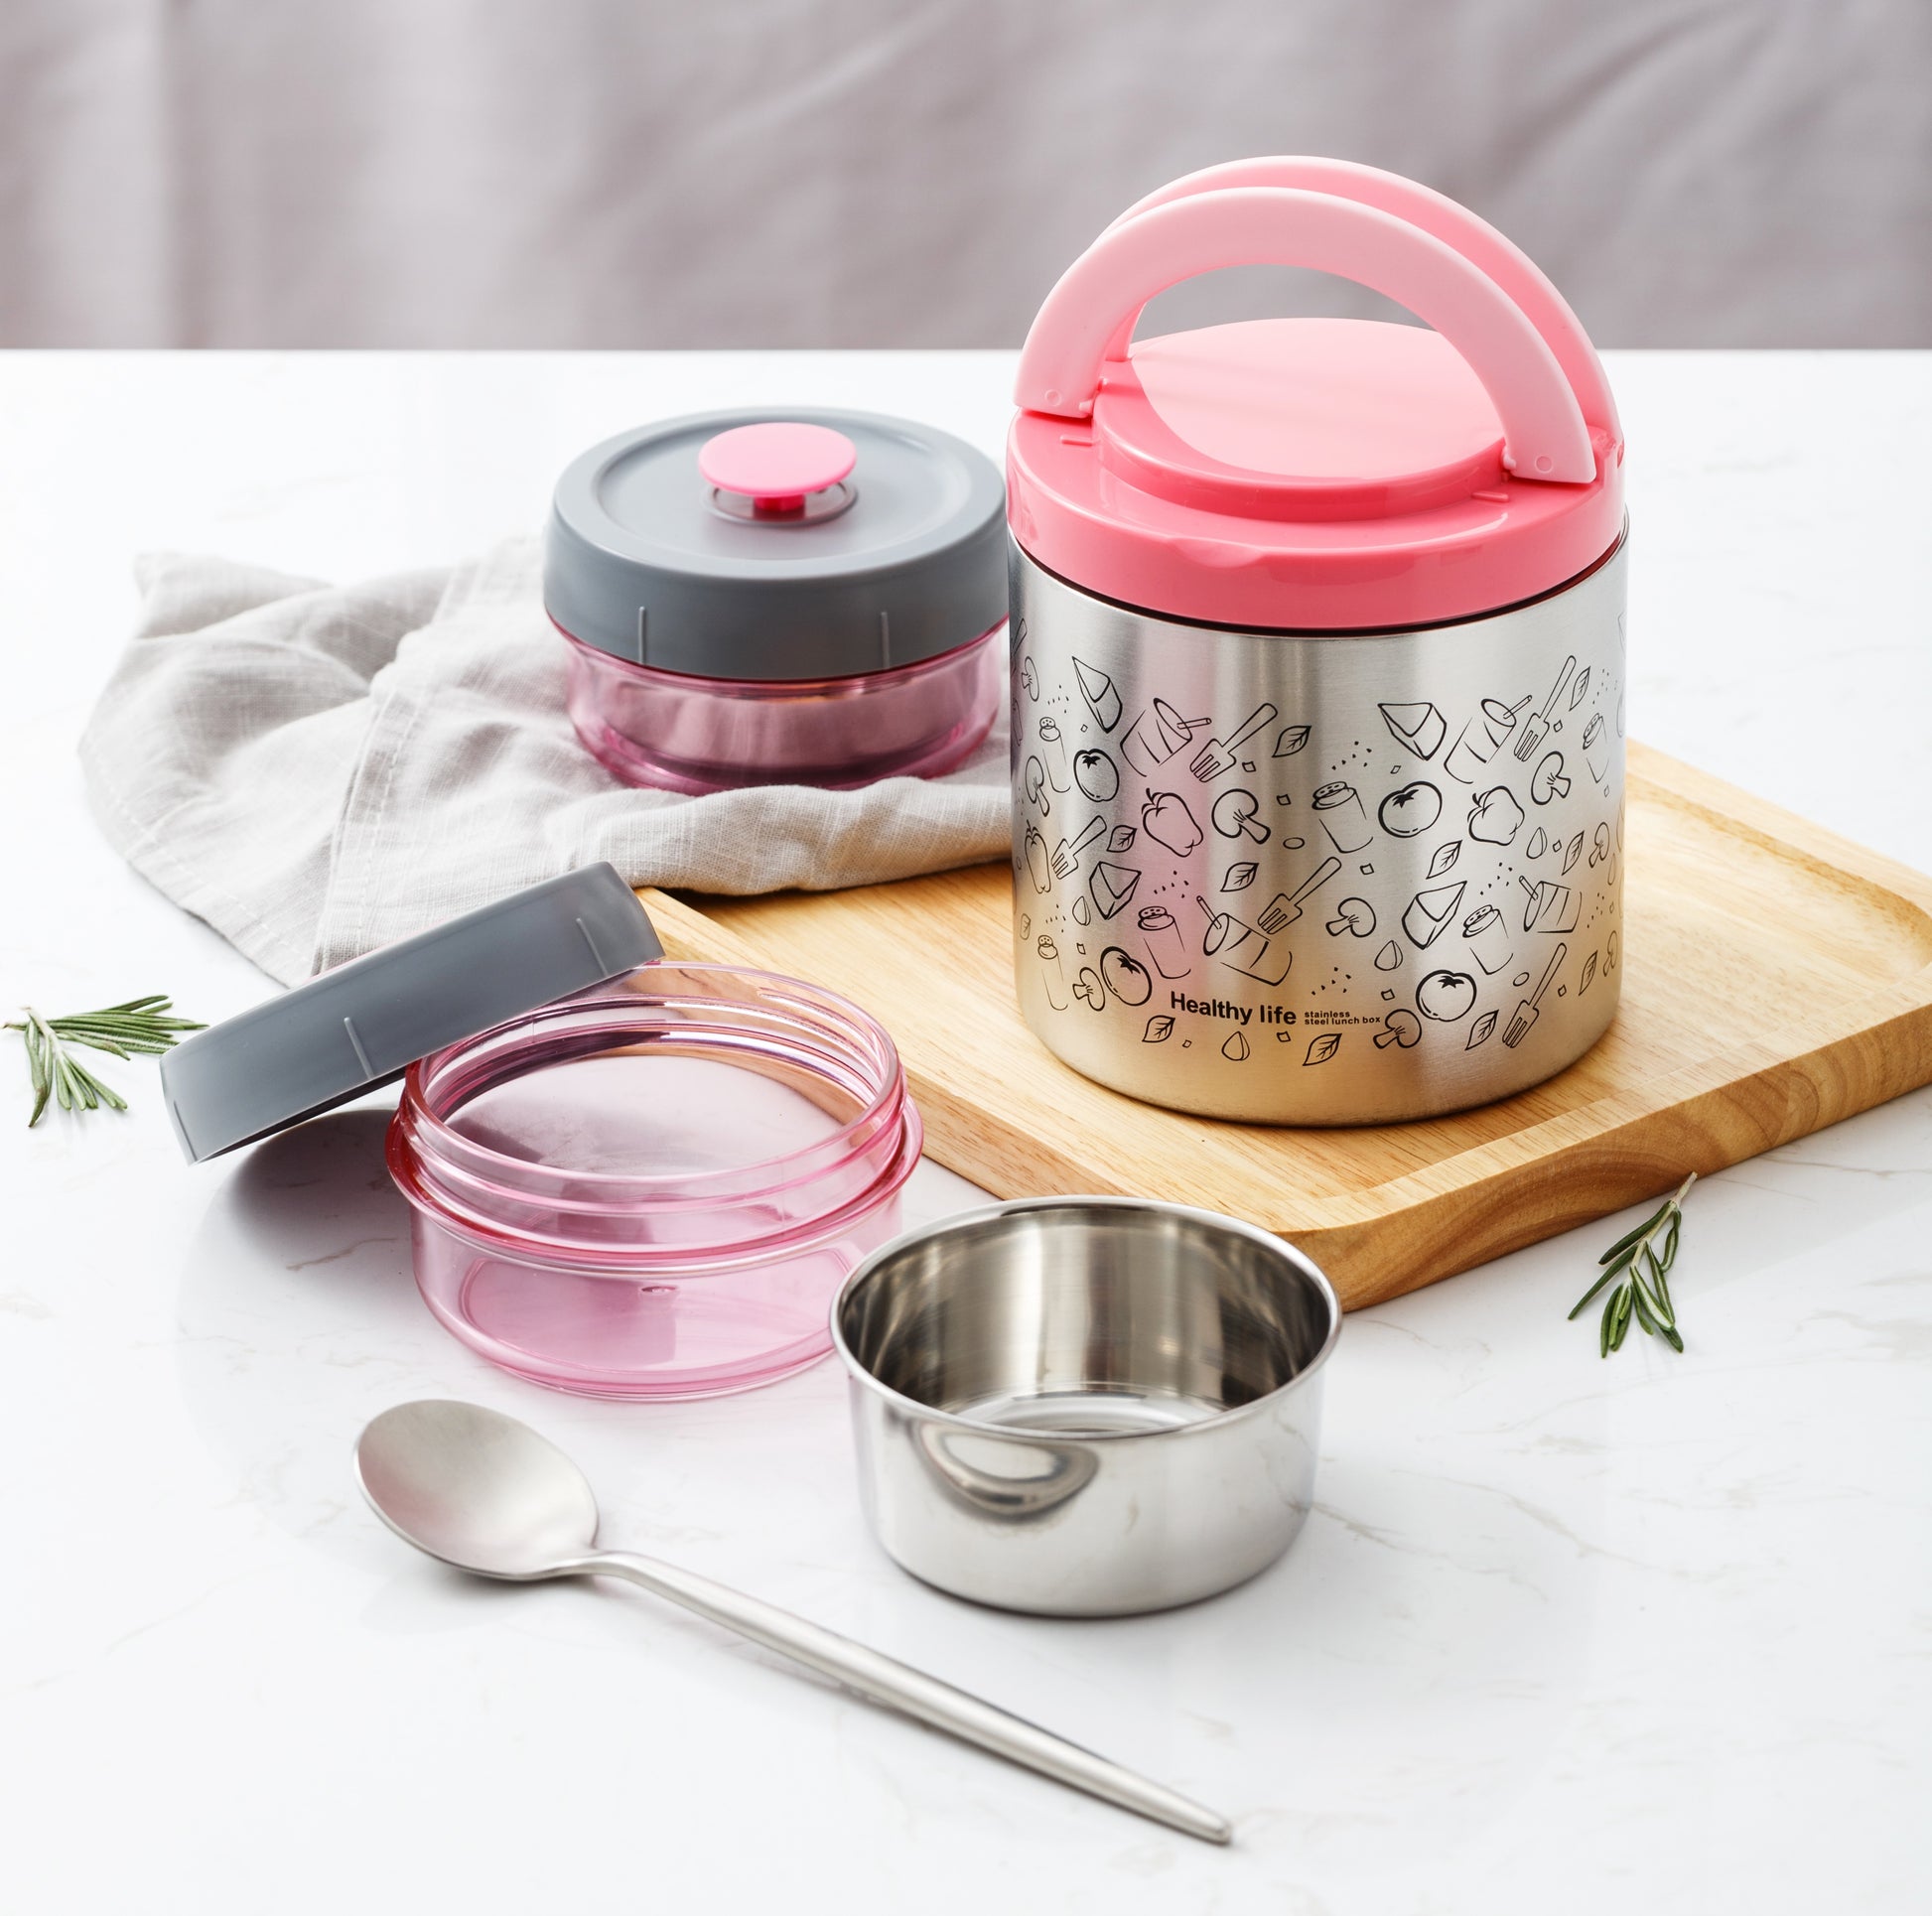 650ml 18/8 Stainless Steel Lunch box Vacuum Insulated Food